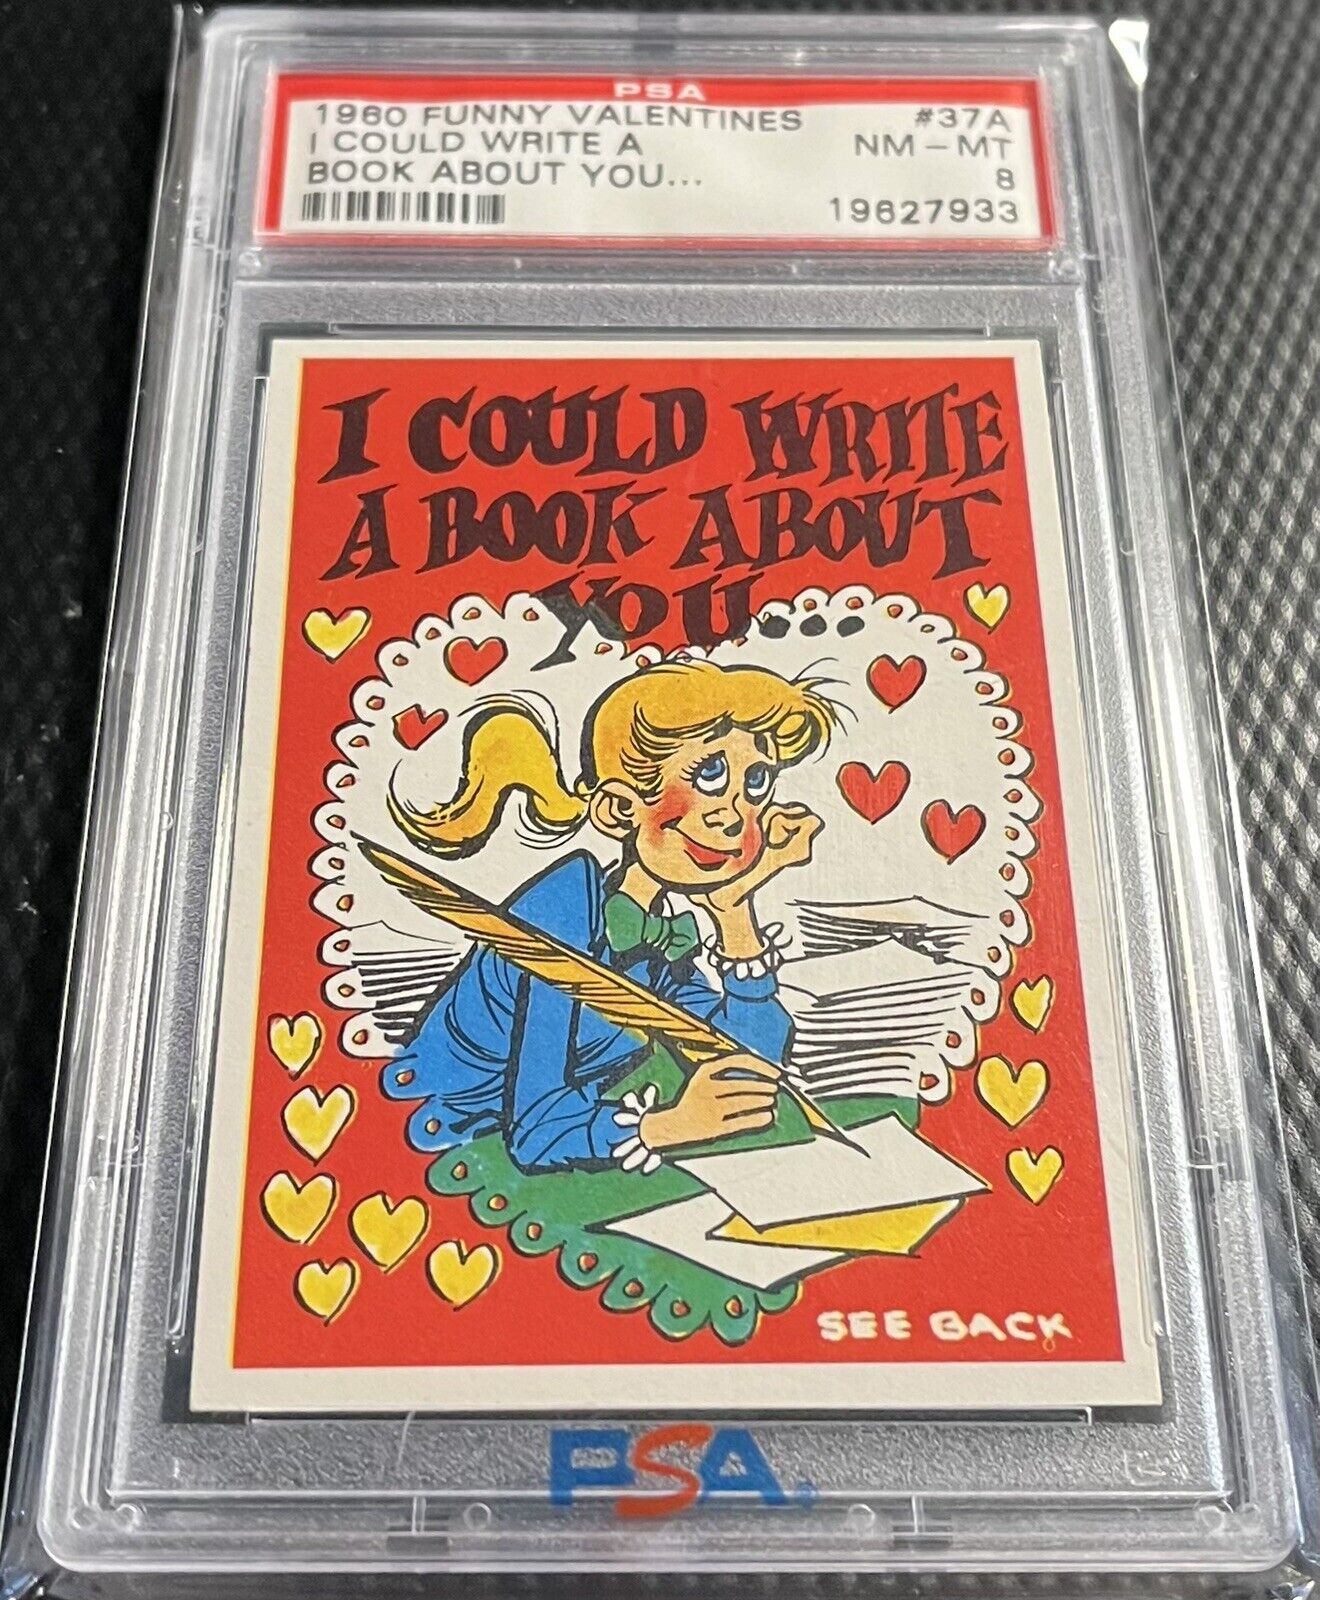 1960 Topps PSA 8 Vintage Funny Valentines #37A Graded NM-MT - Clean Holder